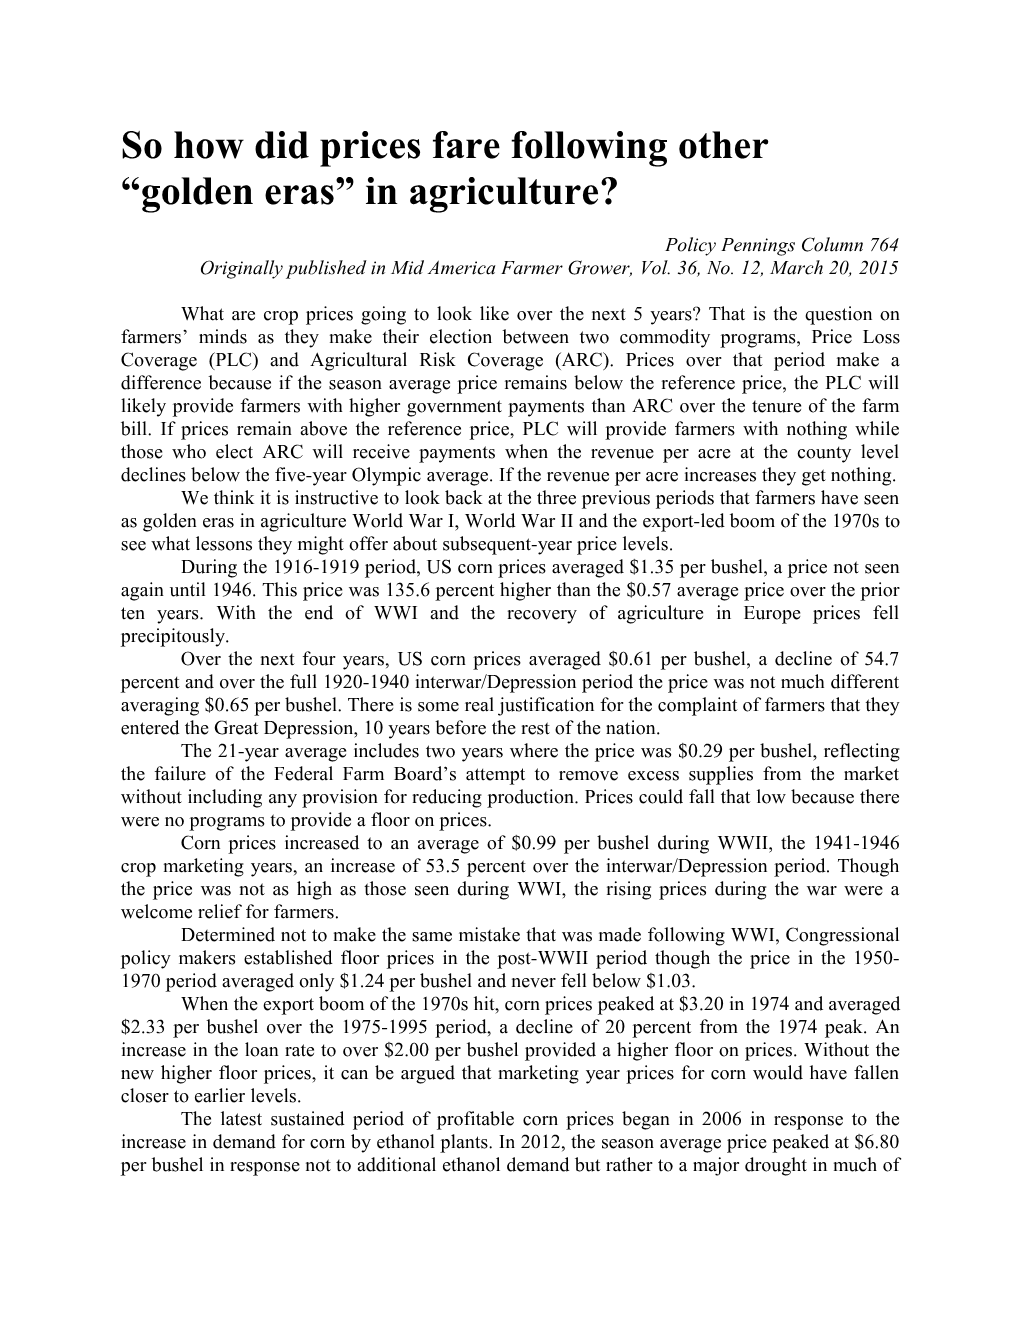 So How Did Prices Fare Followingother Golden Eras in Agriculture?